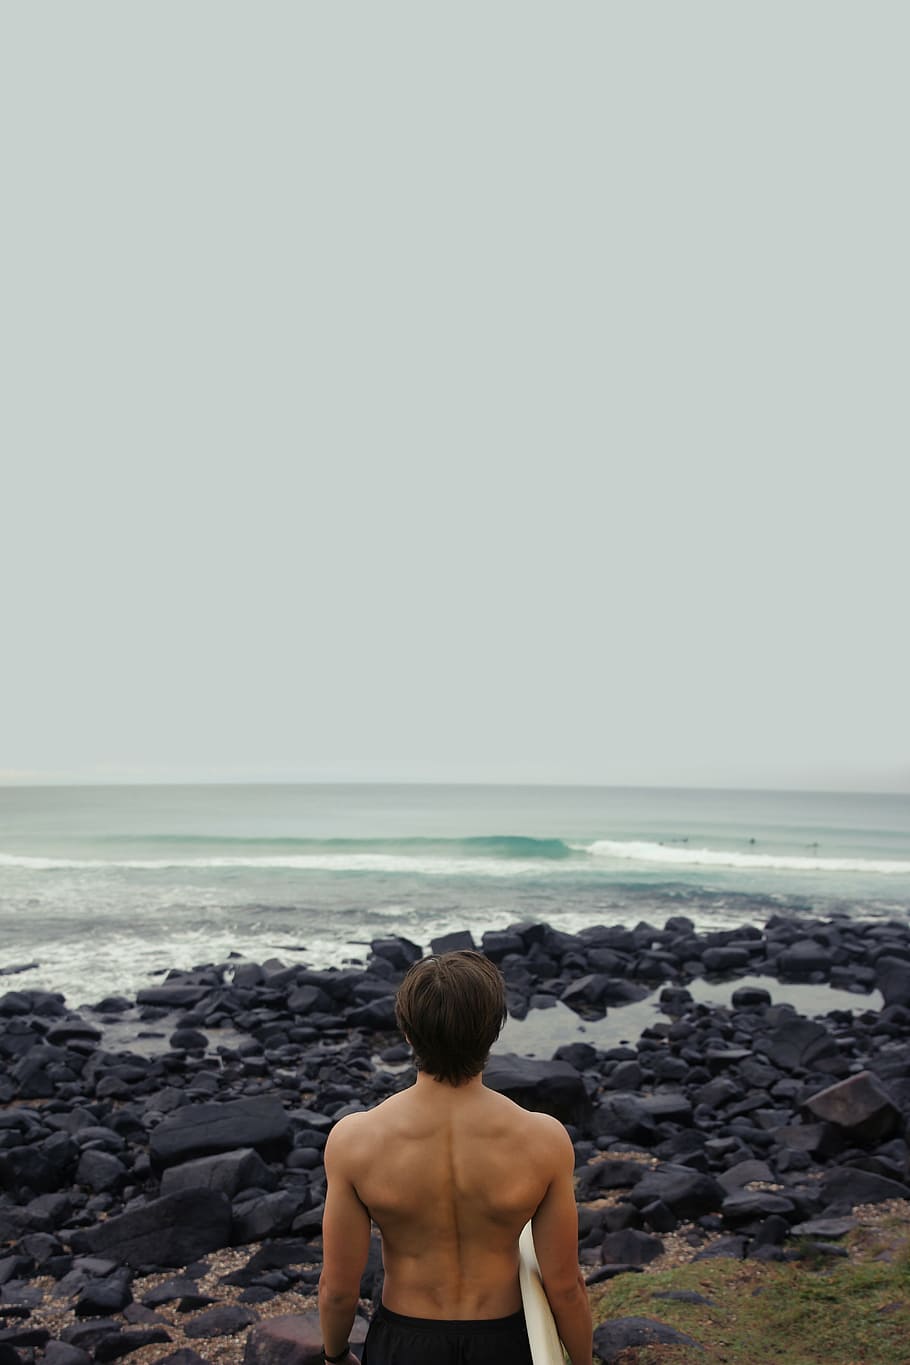 man, standing, sea, holding, surfboard, staring, body, water, daytime, surfer